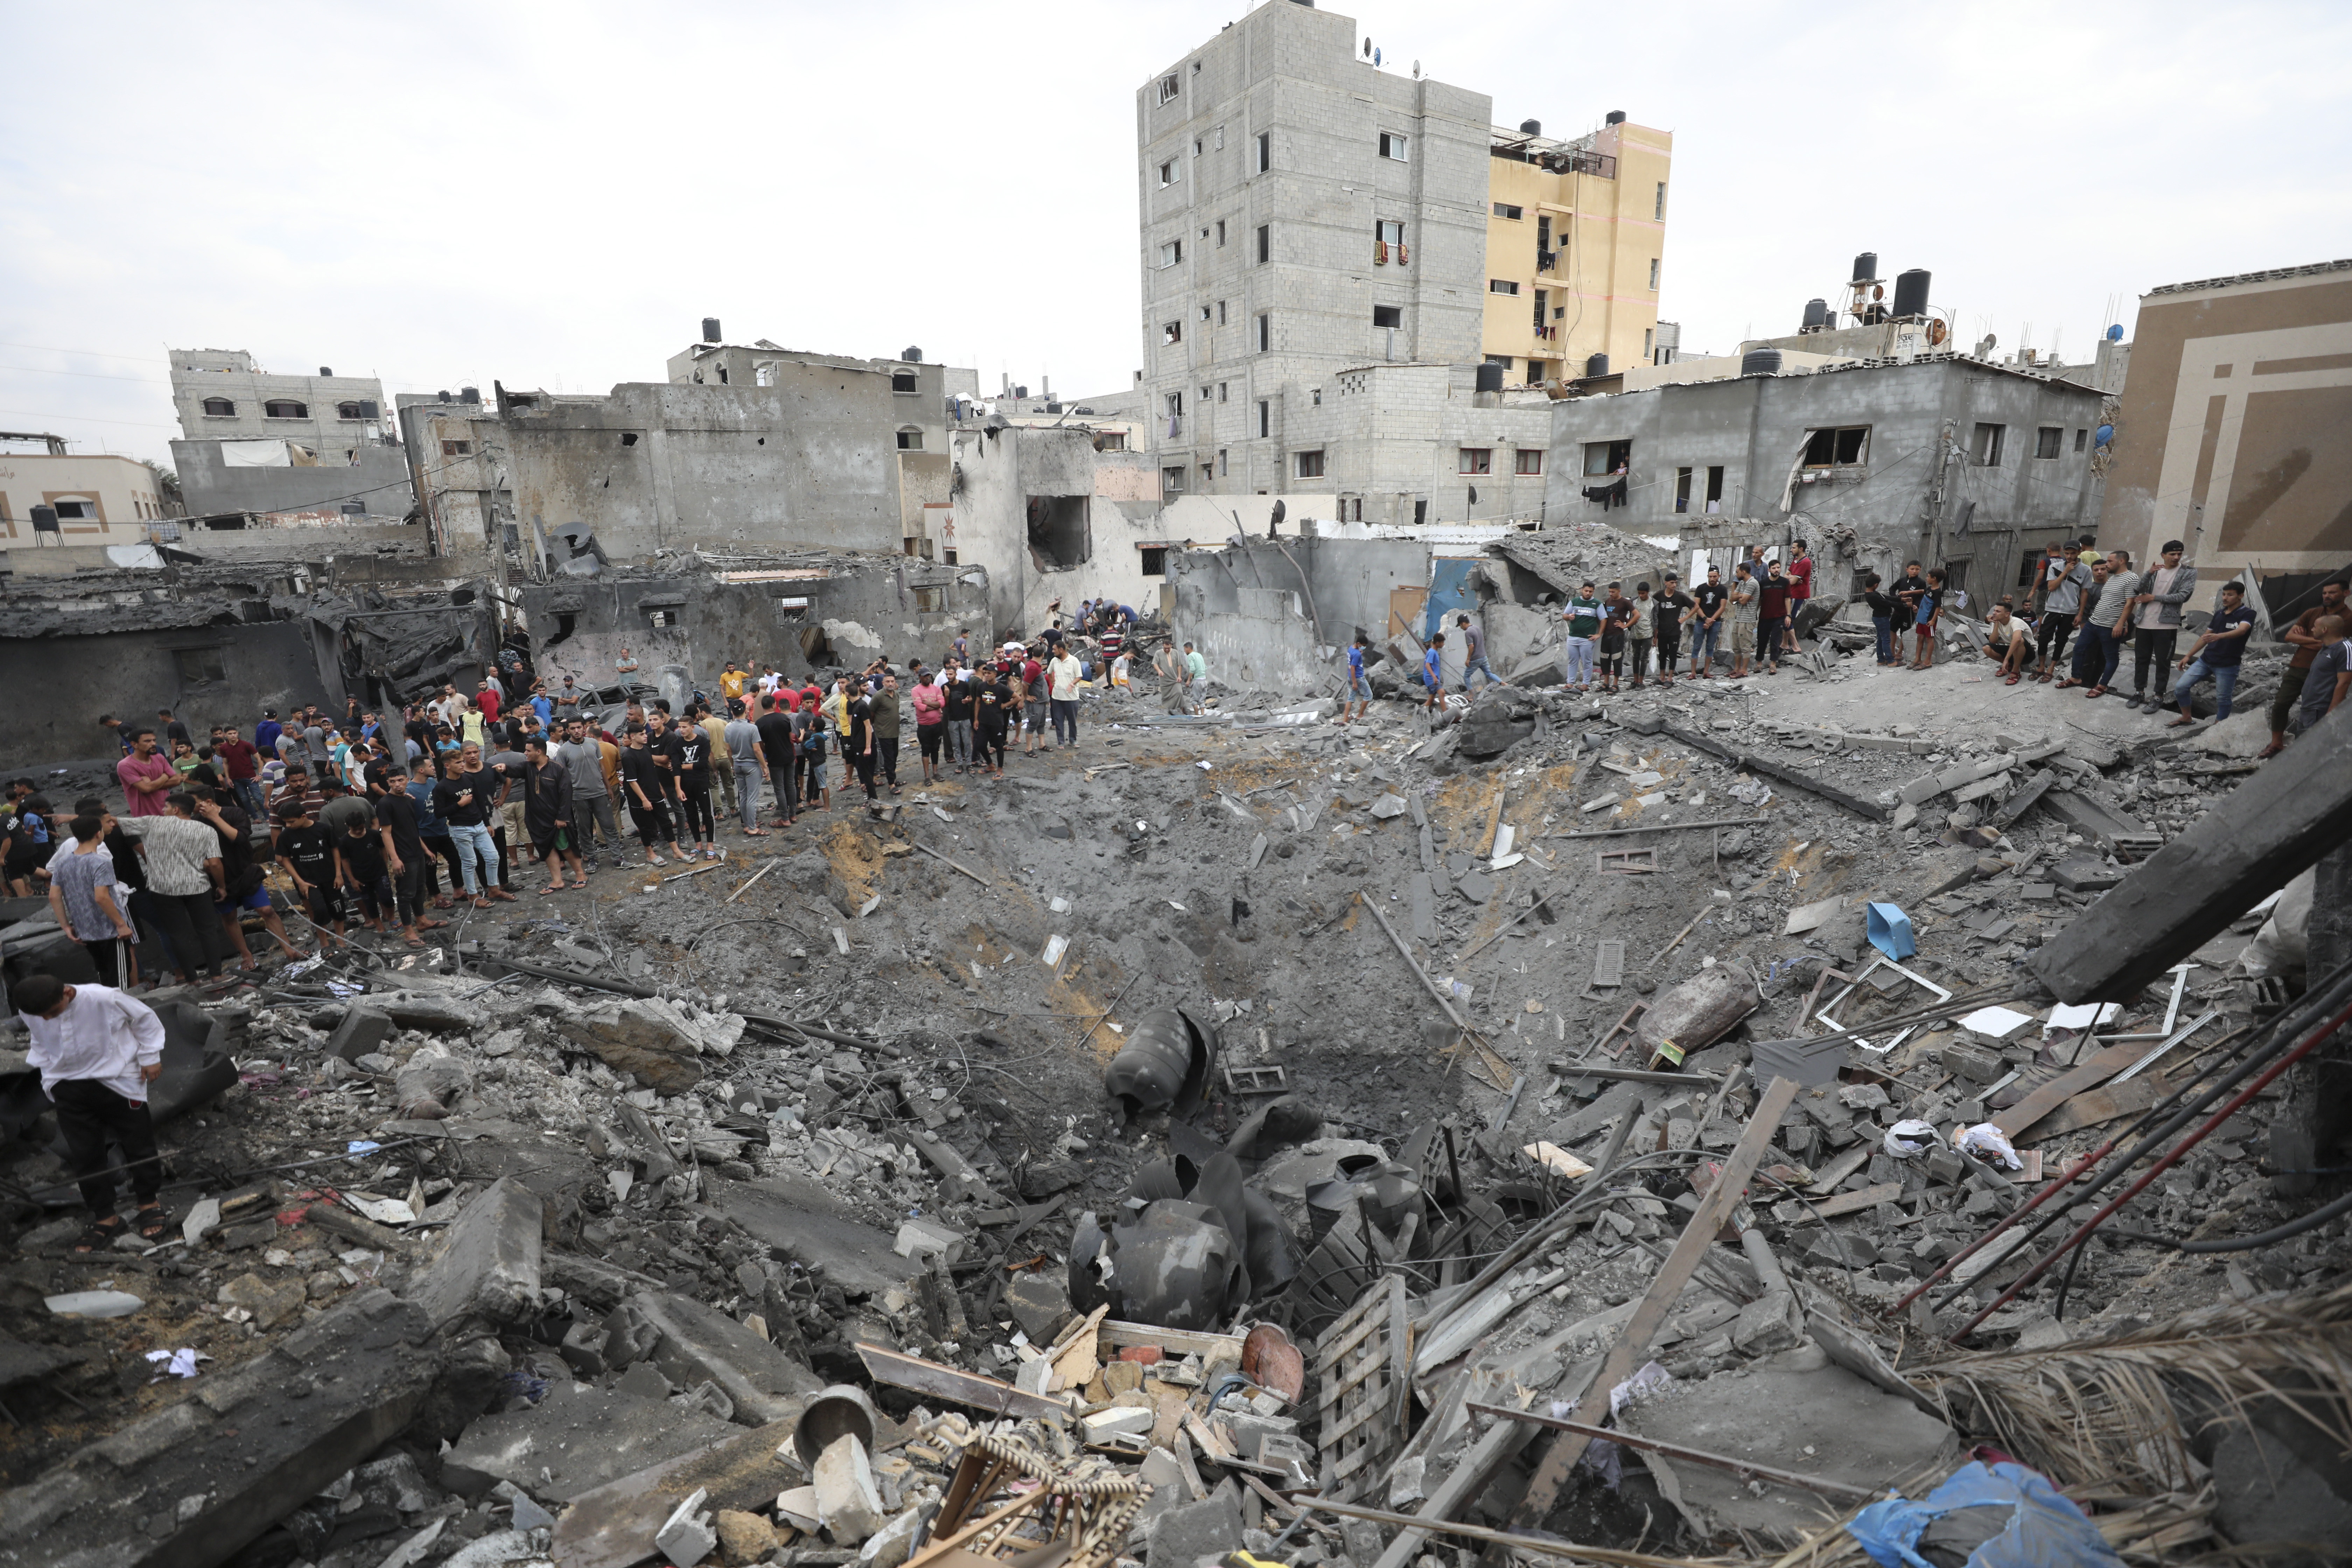 Canada will match donations up to $10M to Gaza humanitarian fund